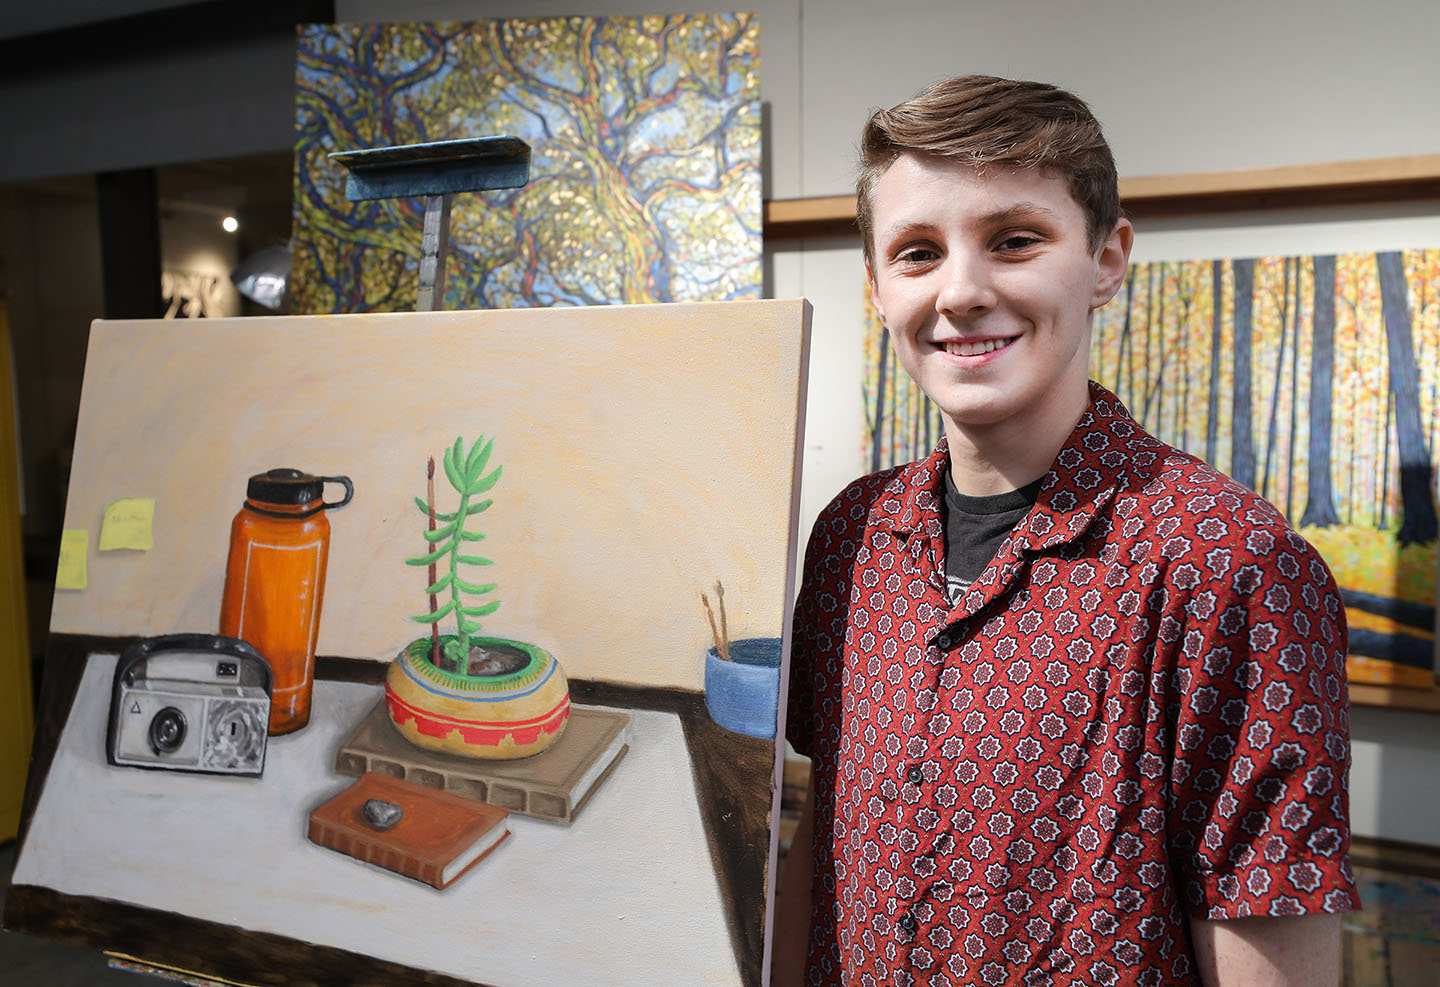 Ryan Sikes, an art education major, received the Multicultural Community Service Scholarship from UNK’s Office of Student Diversity and Inclusion. The scholarship covers tuition for up to four years.